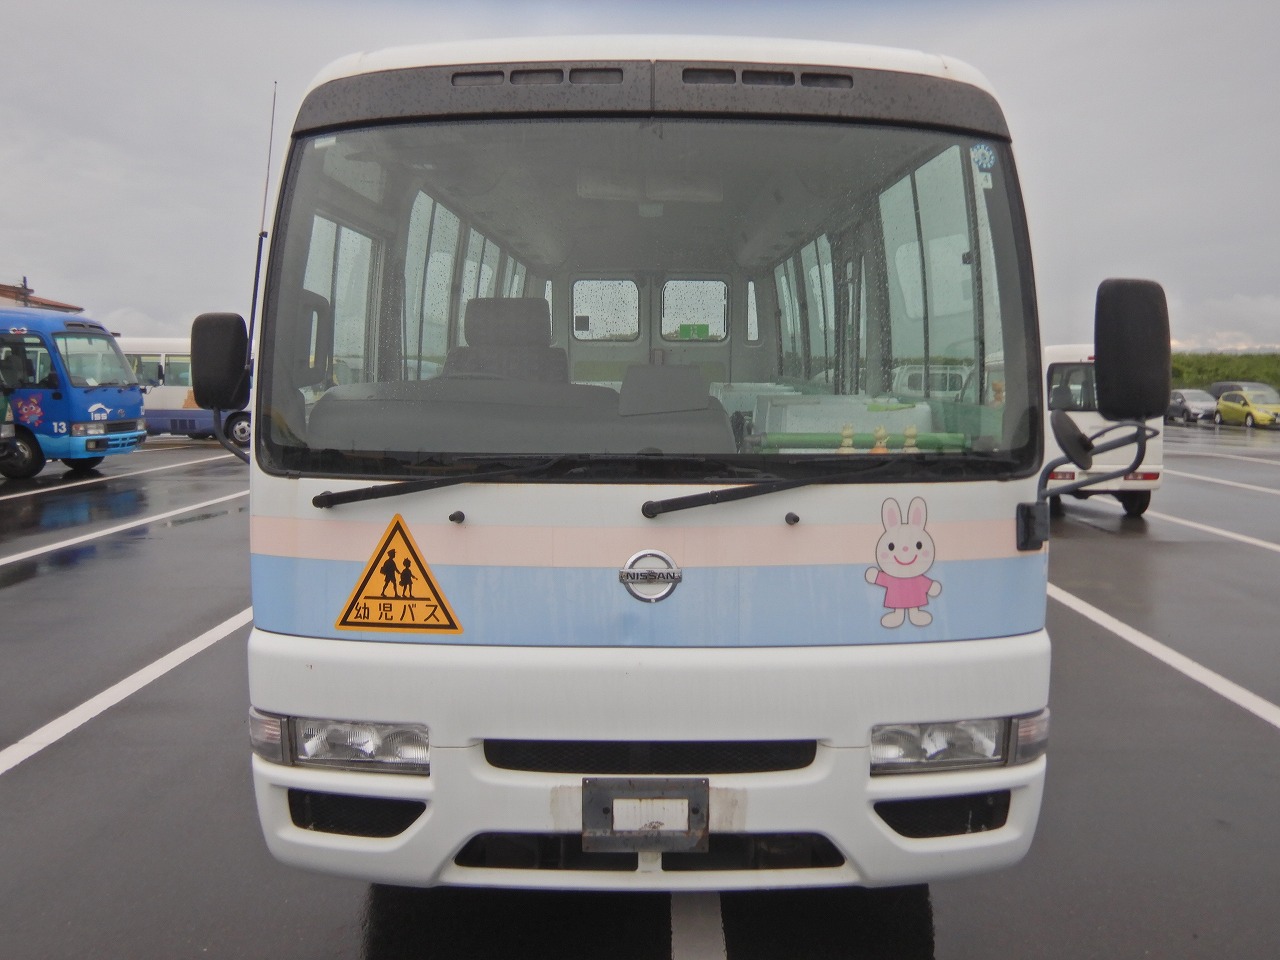 Used NISSAN CIVILIAN BUS 2008/Mar CFJ8957014 in good condition for 